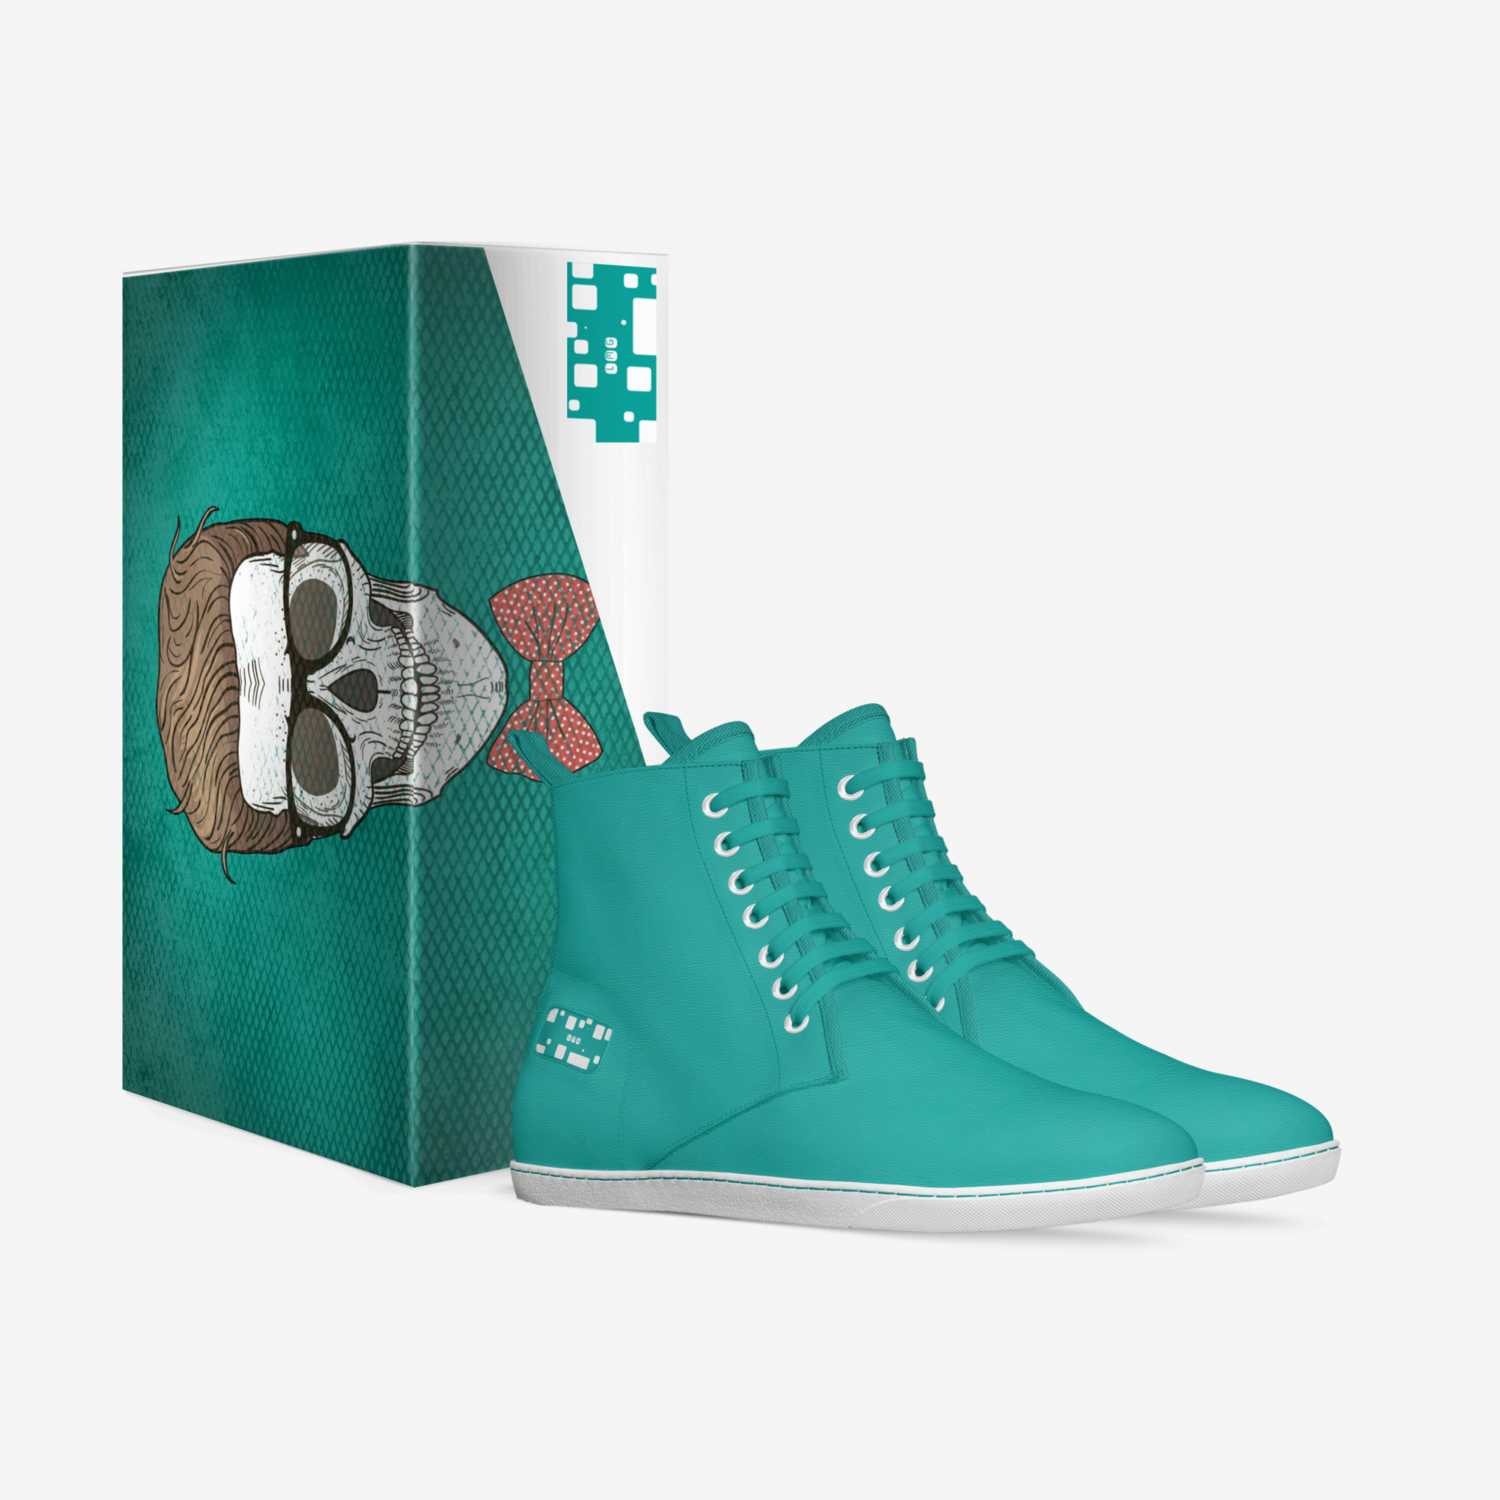 LMG custom made in Italy shoes by Lutz Montgomery | Box view